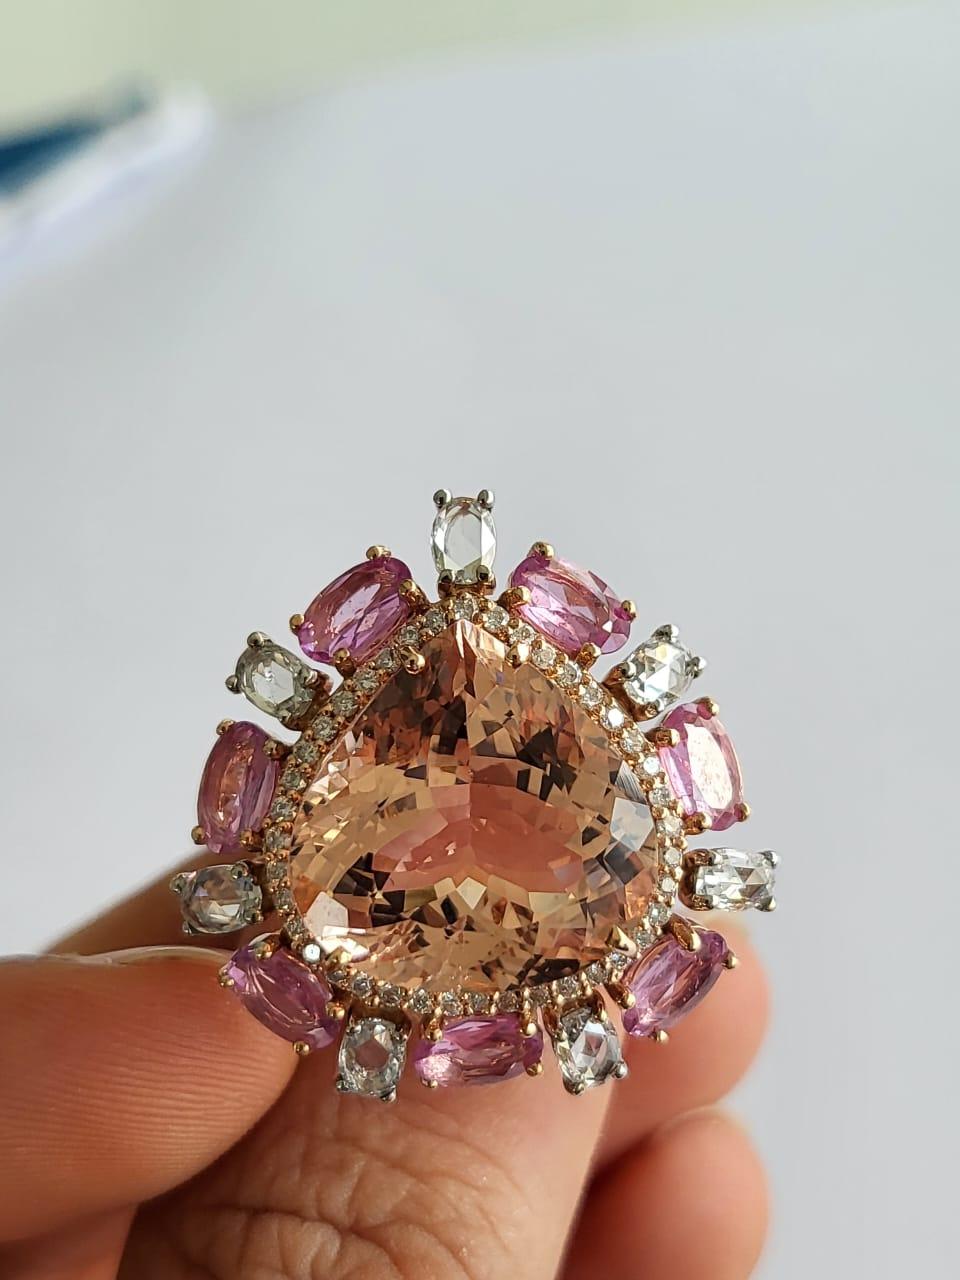 A very gorgeous and beautiful, Morganite & Pink Sapphires Cocktail Engagement Ring set in 18K Rose Gold & Diamonds. The weight of the Morganite is 11.13 carats. The weight of the Pink Sapphires is 2.31 carats. The Pink Sapphires are of Ceylon